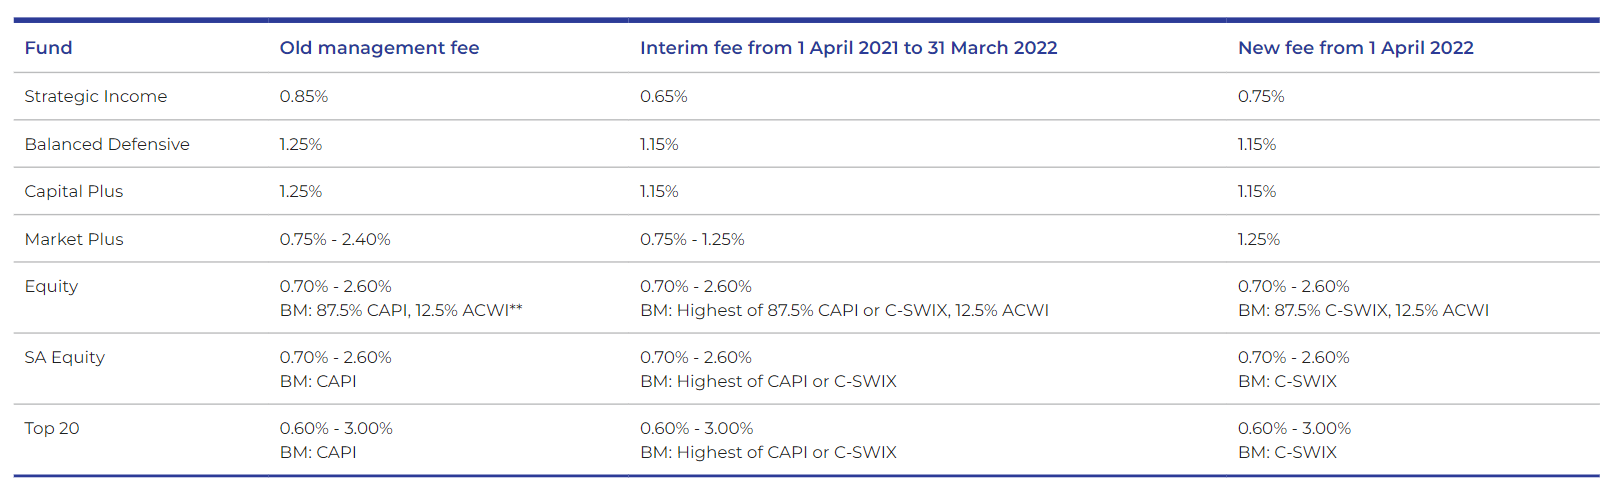 fee changes 2021 march graphic.png